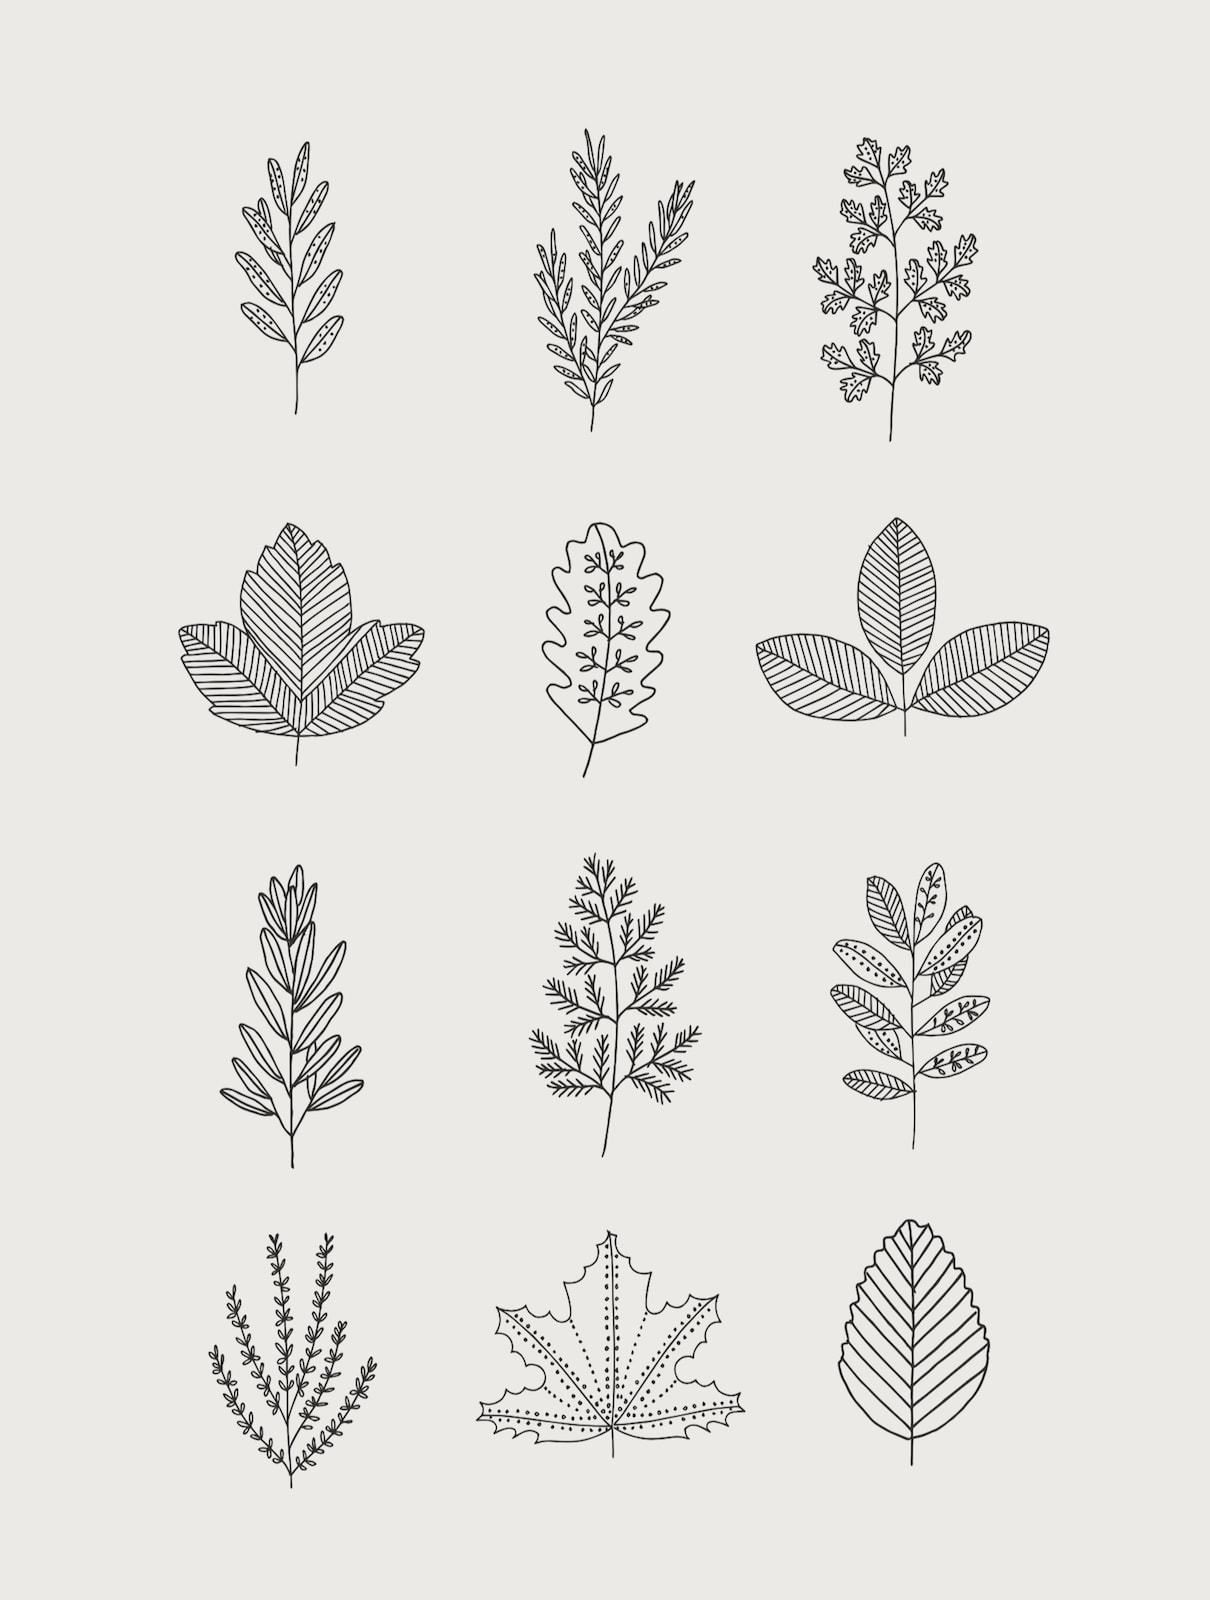 30 Ways to Draw Plants & Leaves -   16 planting Drawing nature ideas